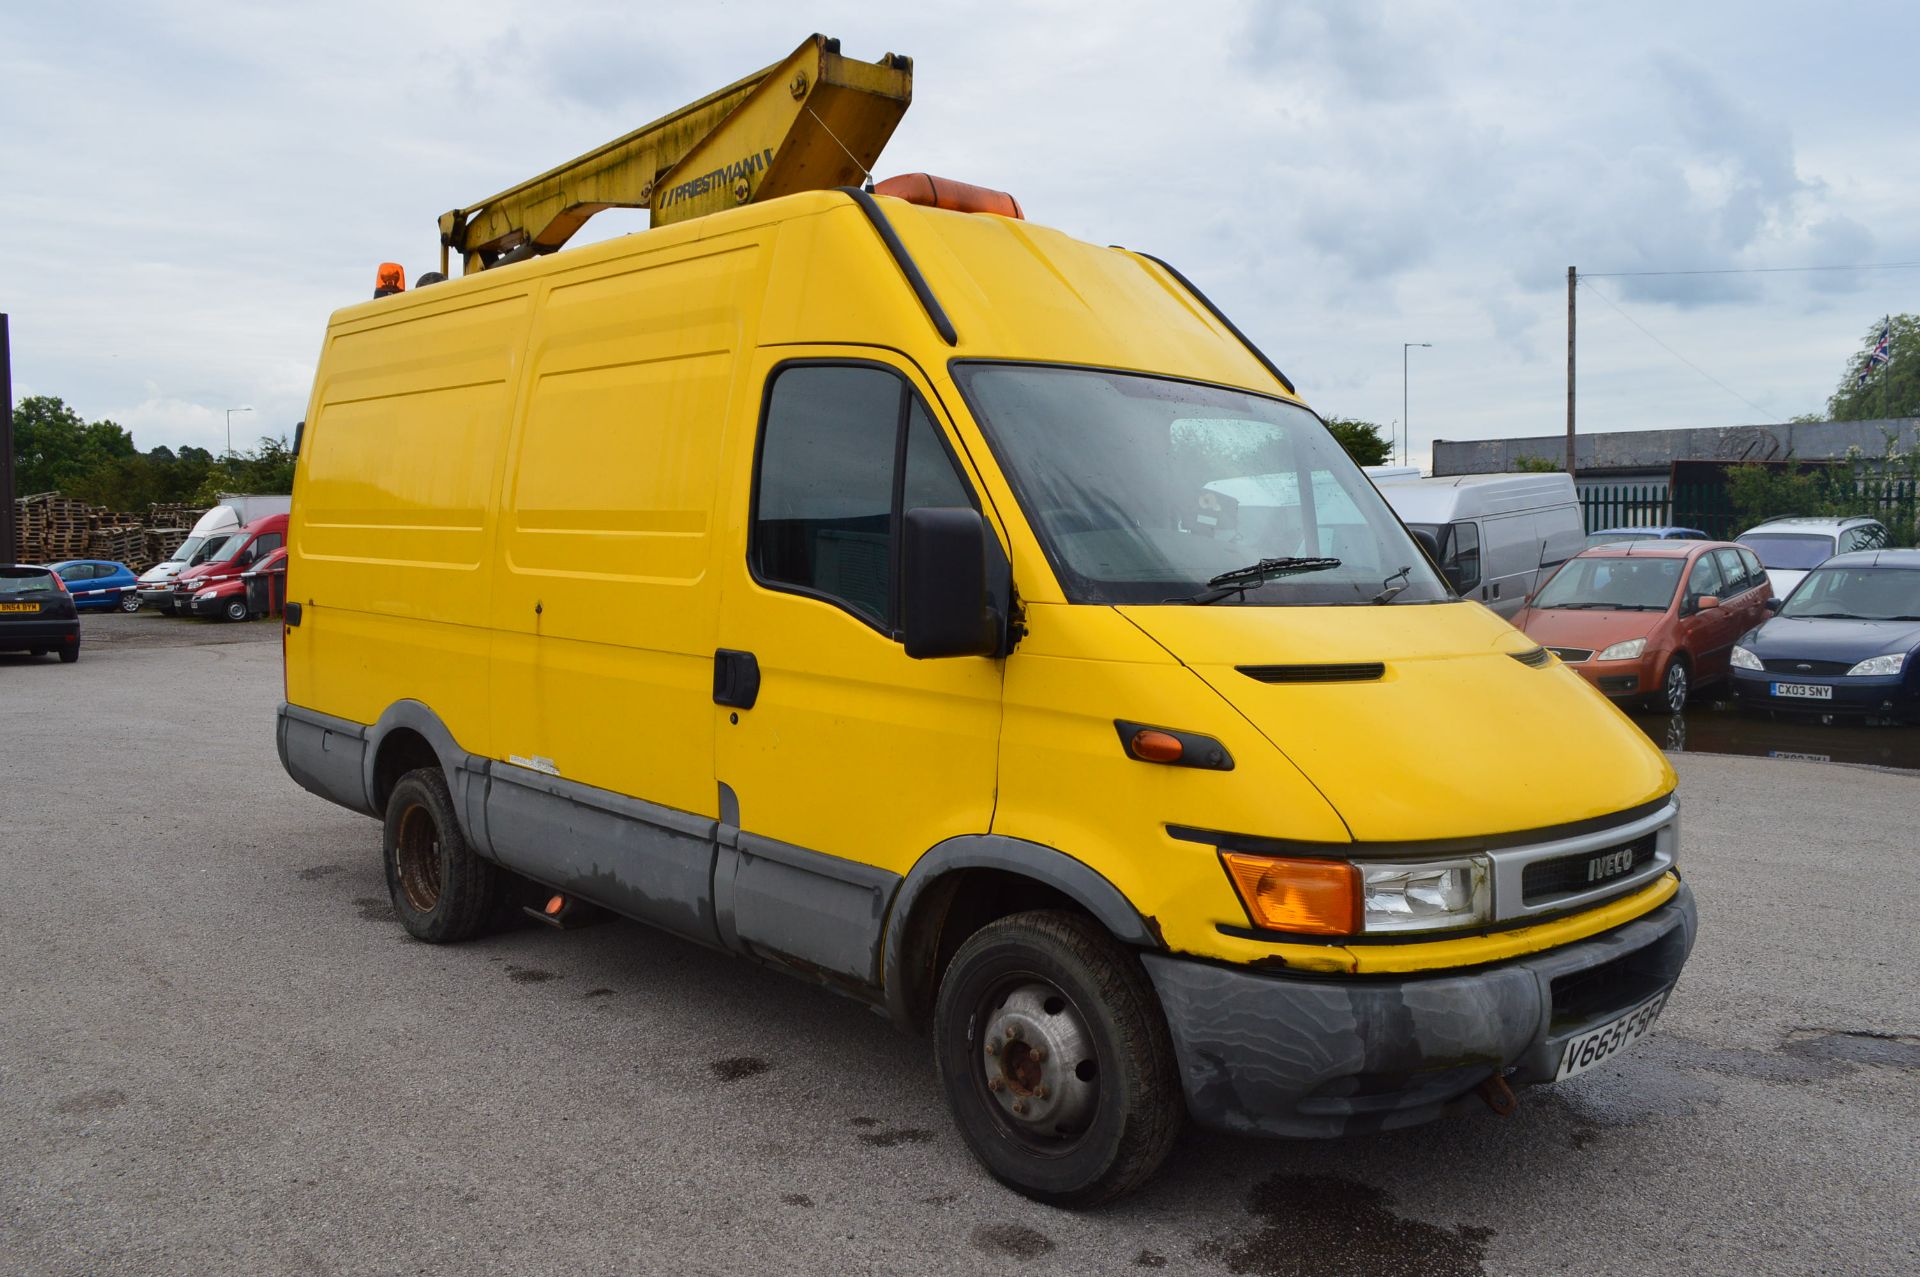 CHERRY PICKER 2000/V REG IVECO-FORD DAILY 2000 50C11 - 1 FORMER KEEPER - Image 2 of 24